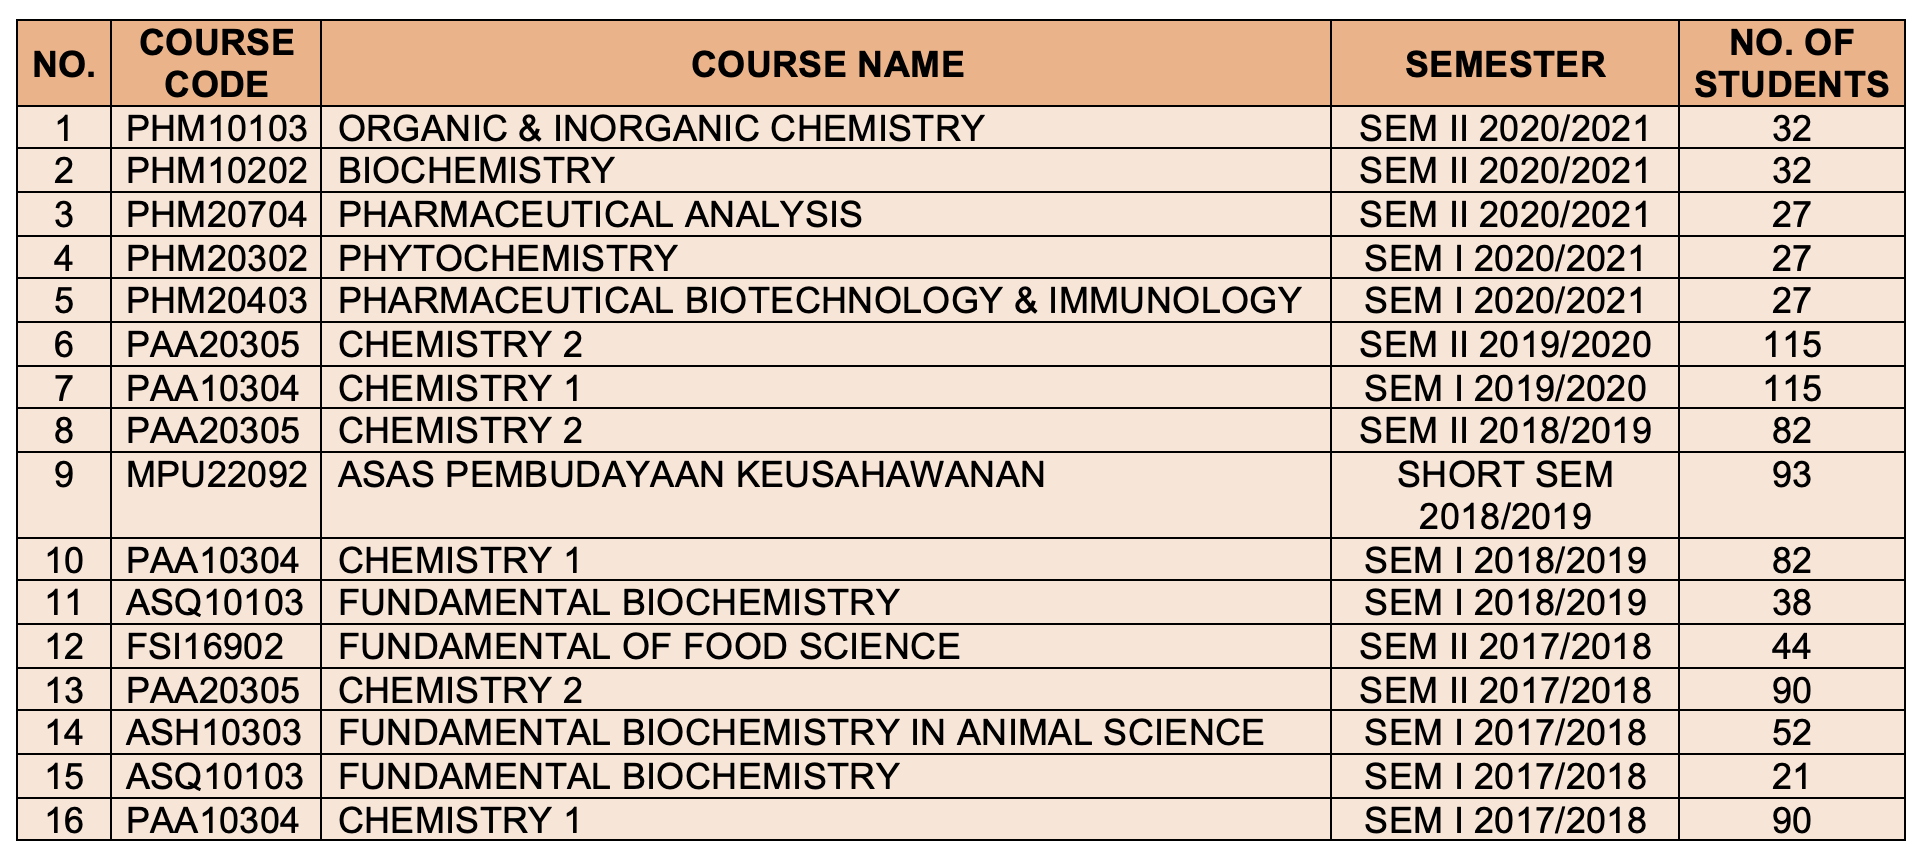 LIST OF COURSES